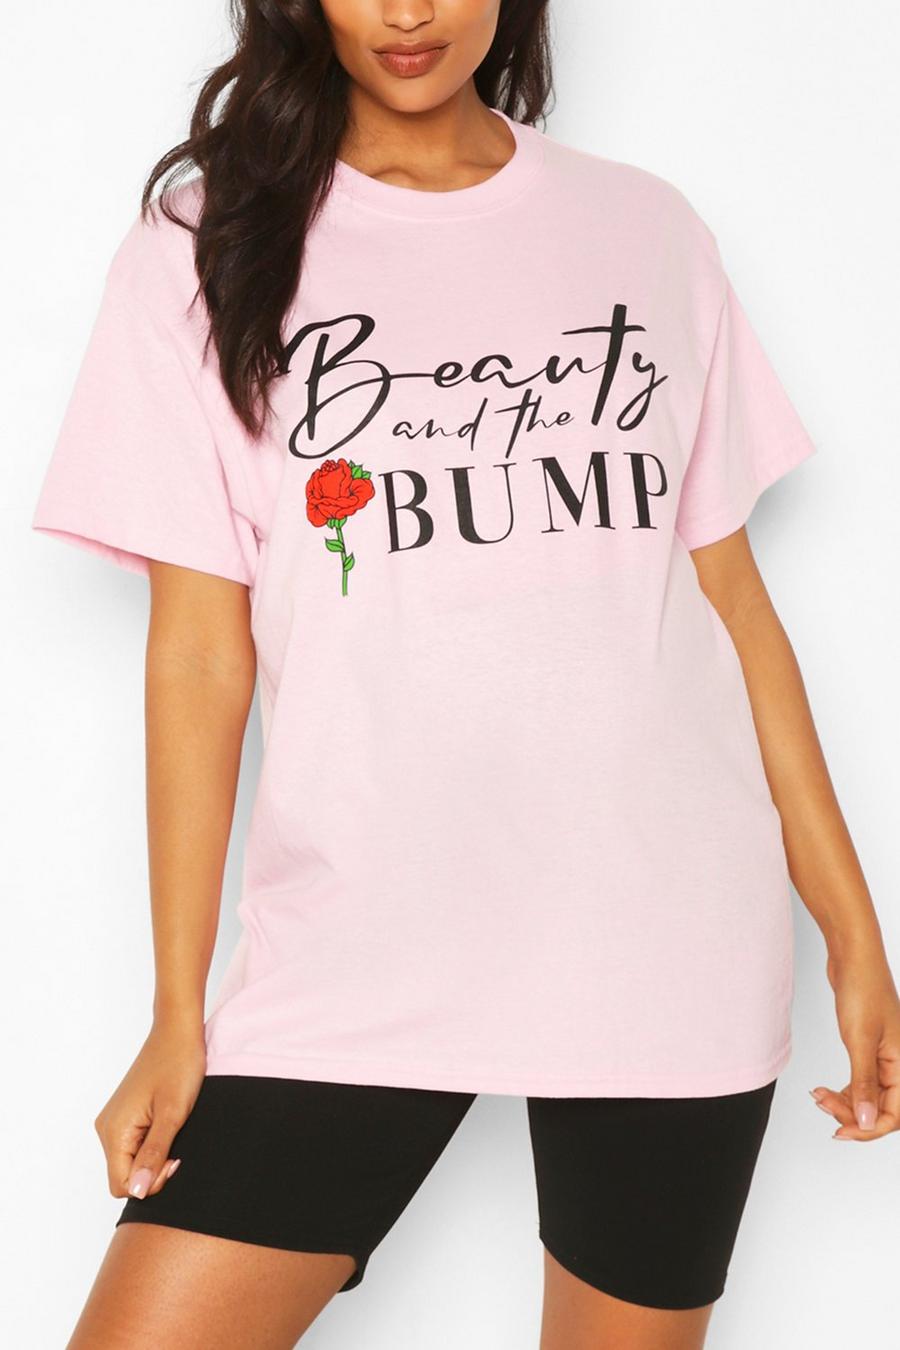 T-shirt premaman con scritta “Beauty and the Bump”, Rosa image number 1